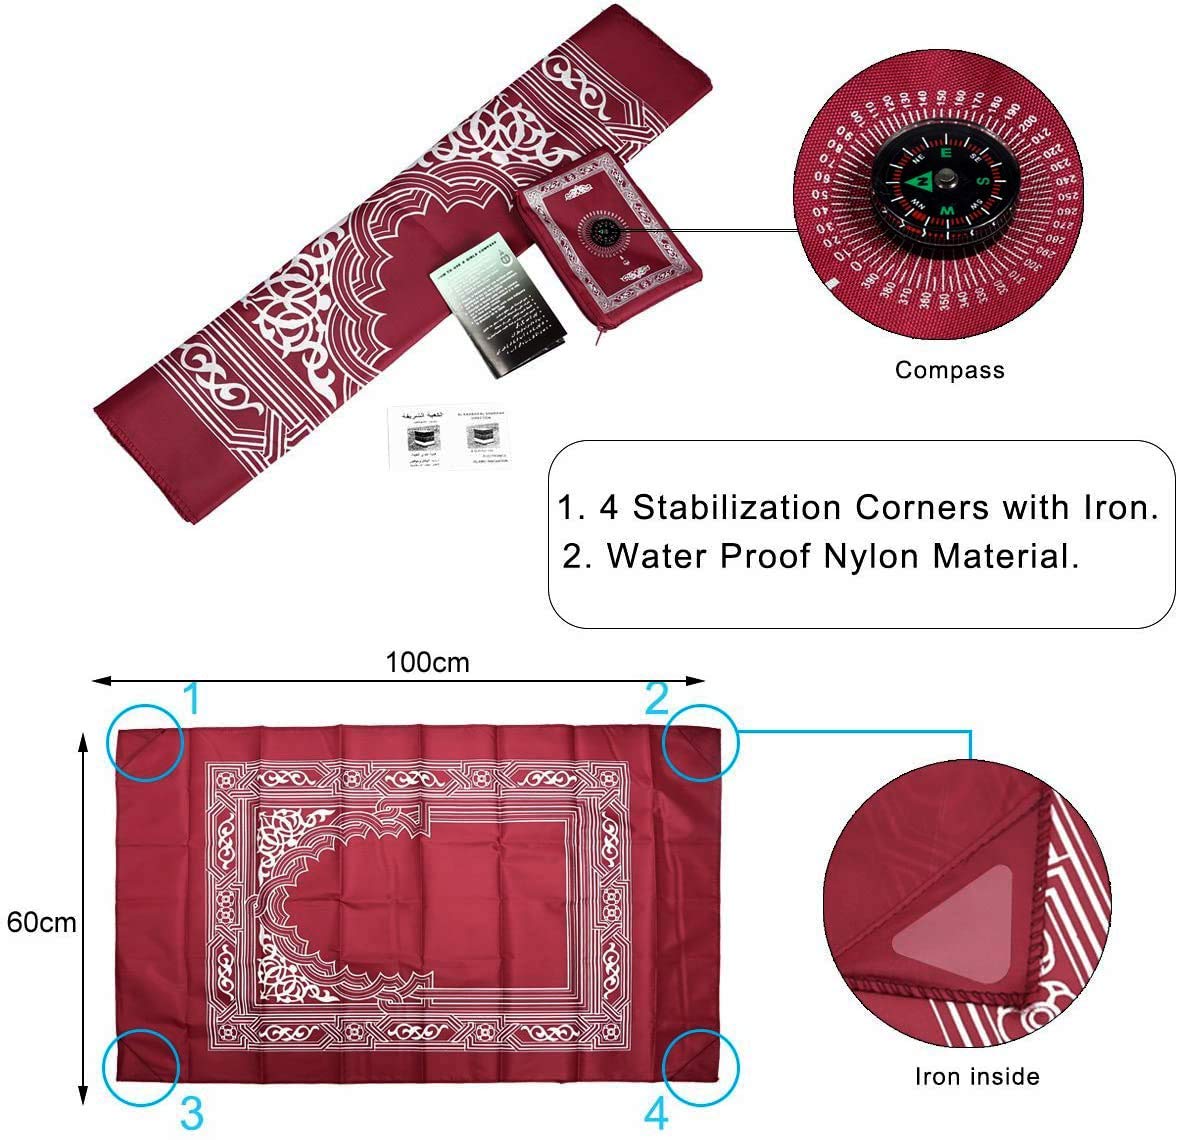 Islamic Muslim Rug Travel Prayer || Mat with compass Pocket Sized Carry Bag Cover 4x5inch || Mat 60x100cm || 5pcs || (Blue, red, green, black and burgundy)